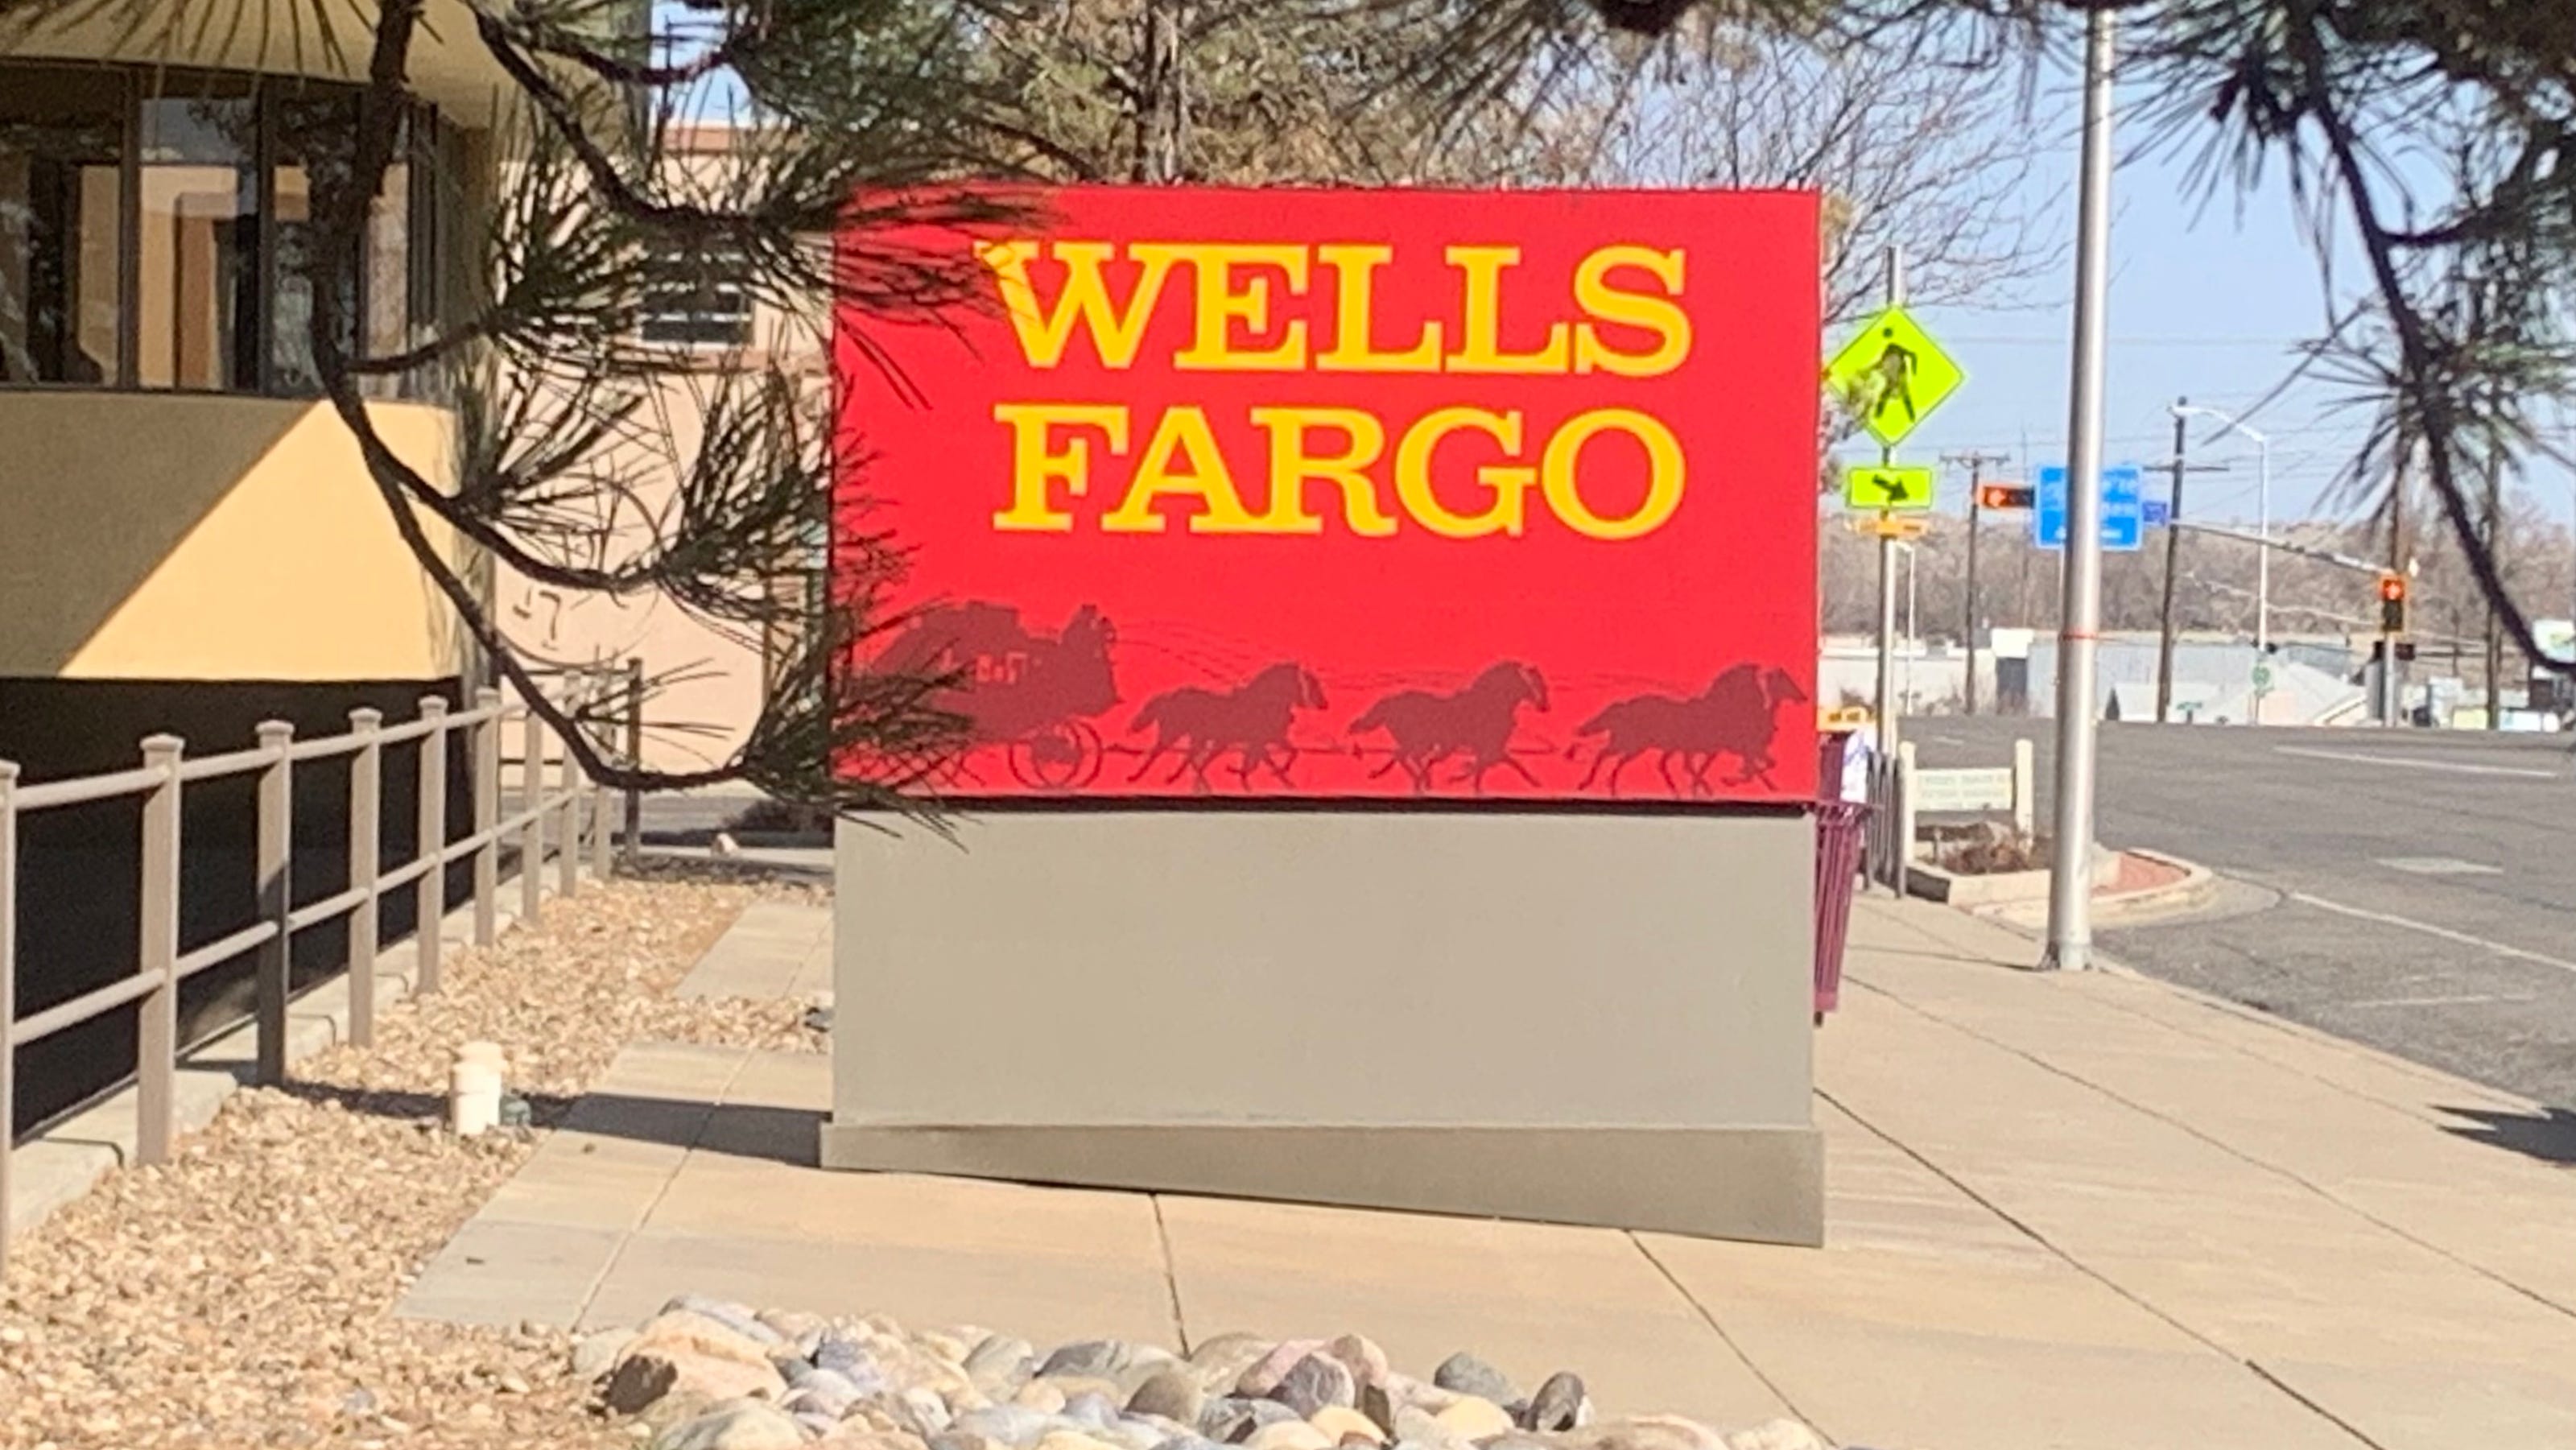 Wells Fargo official describes move to close branch as consolidation